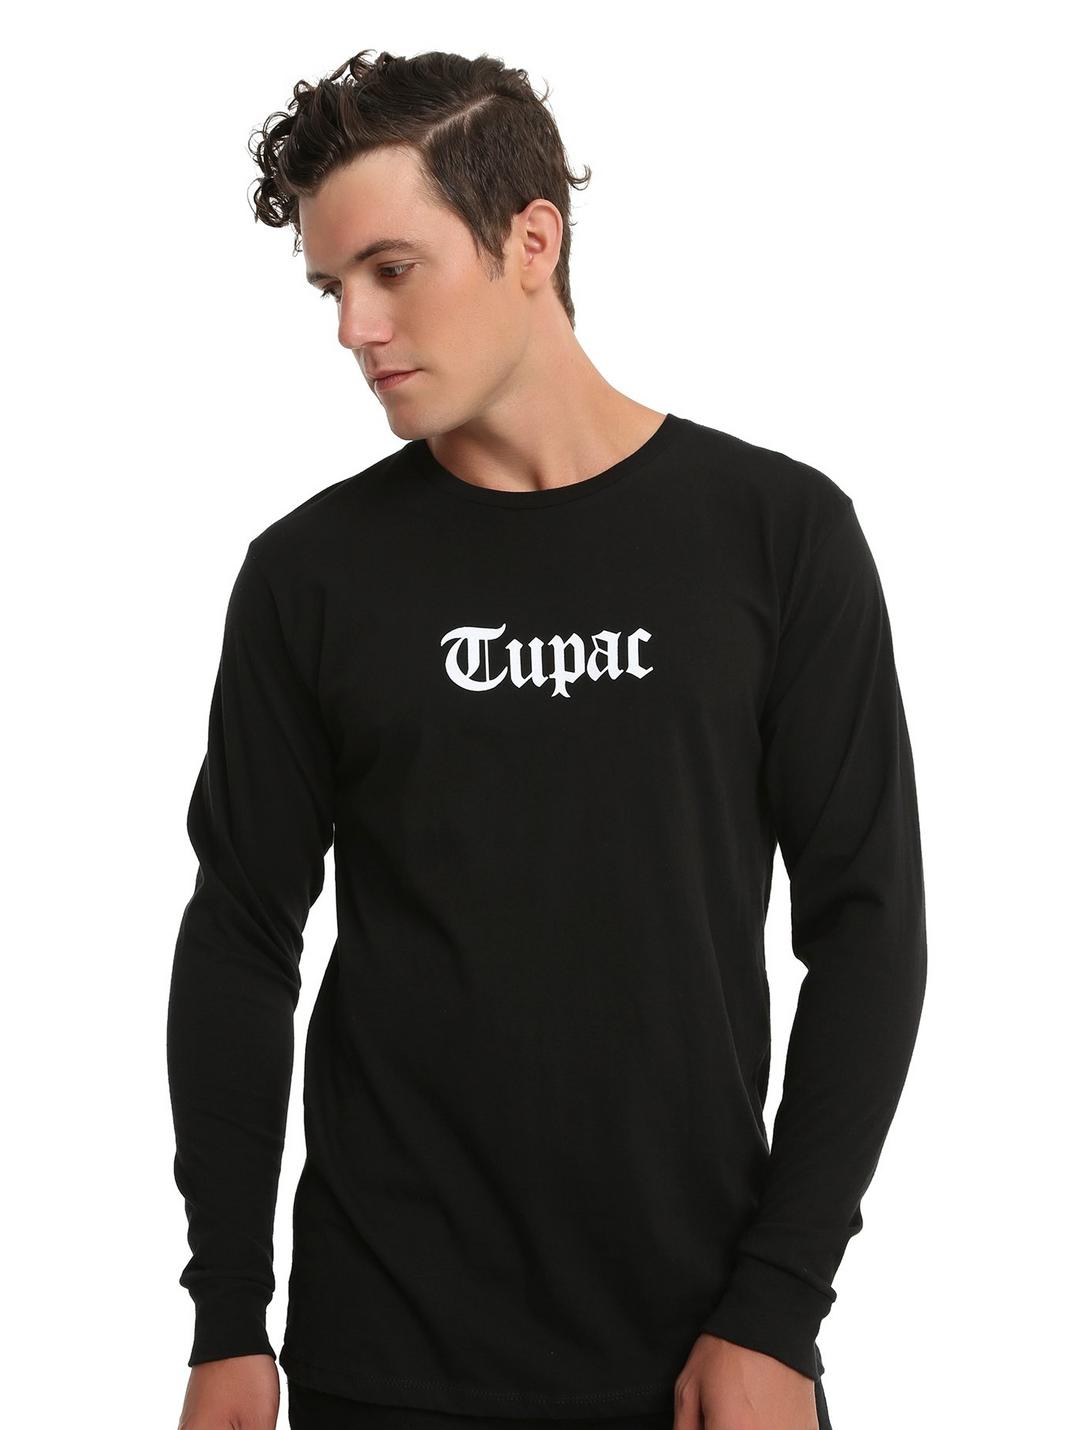 Tupac Only God Can Judge Me Long-Sleeve T-Shirt, BLACK, hi-res